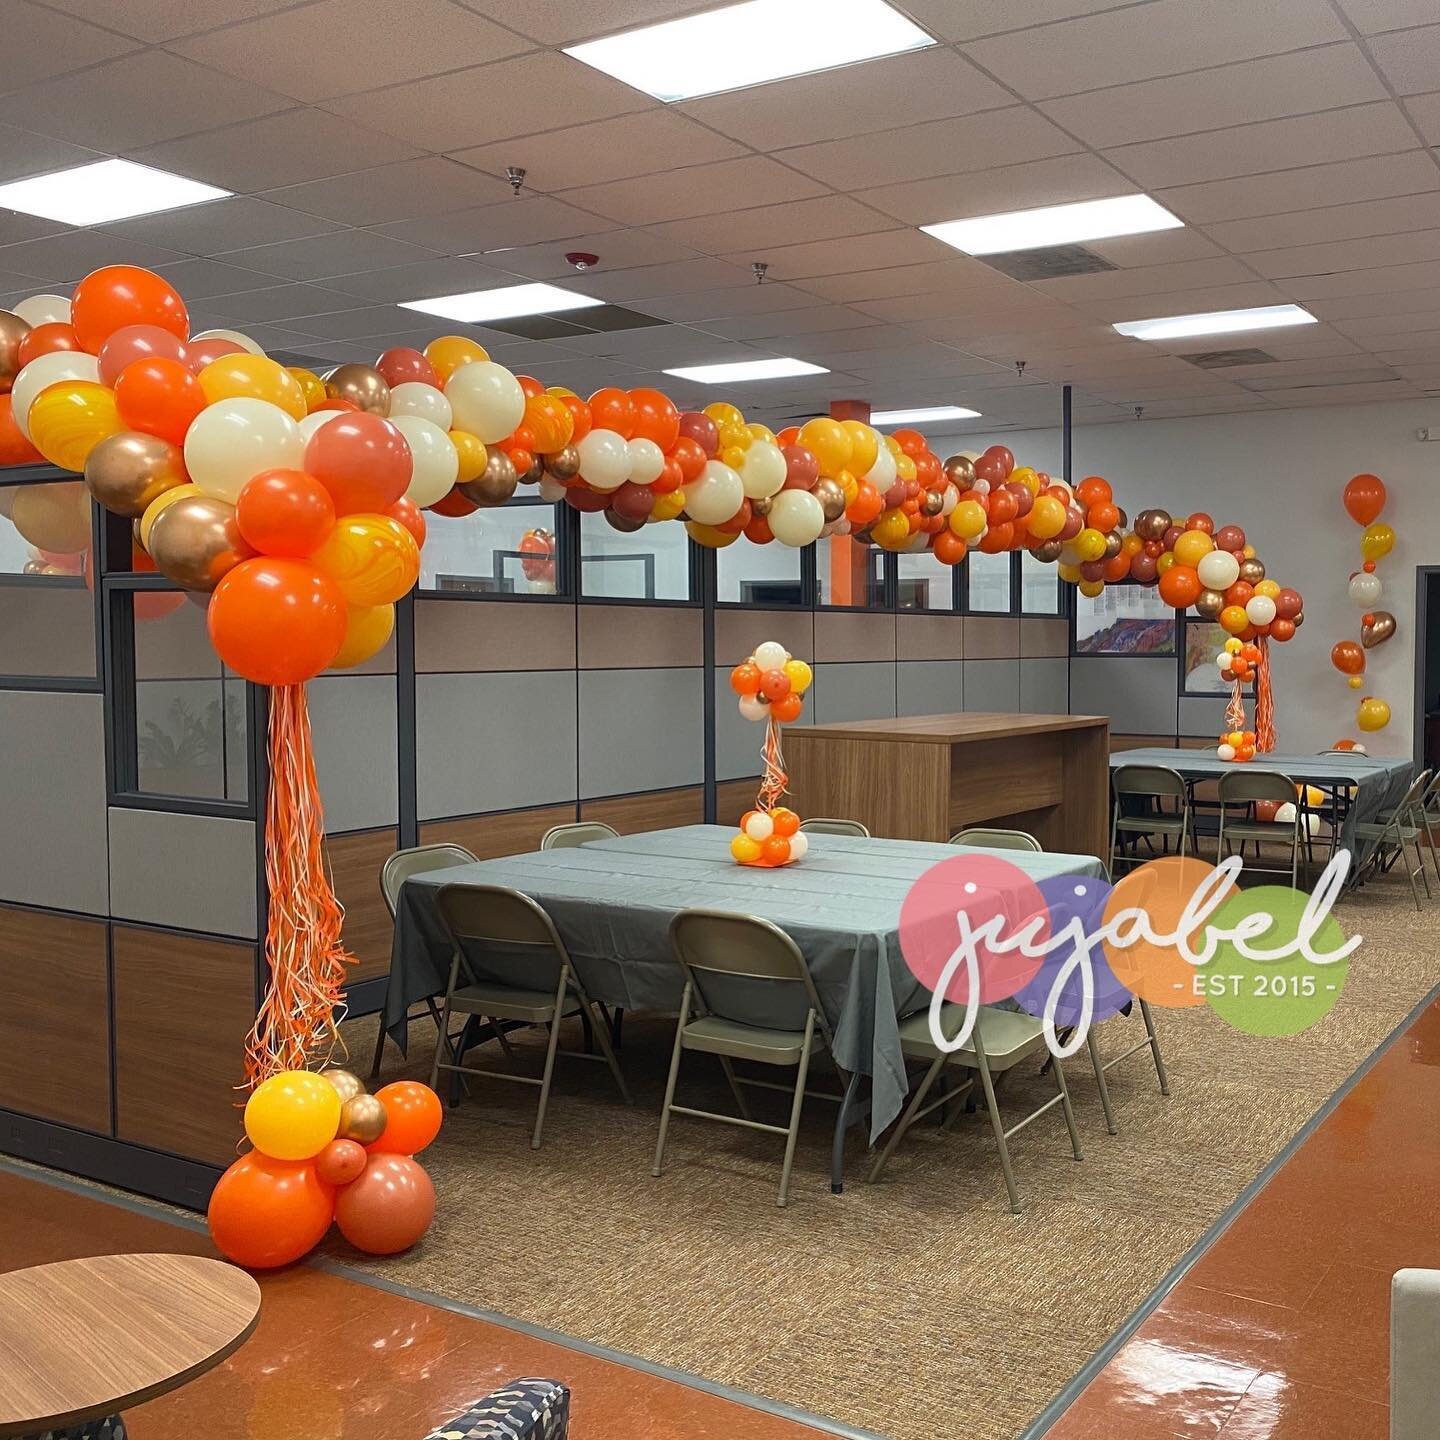 Going out with a bang! Happy Retirement to one of GeoTechnologies Inc. original members. Congrats and Good Luck!

#balloons #balloondecor #raleighballoons #ncballoons #organicballoongarland #ncevents #retirementparty #jujabel